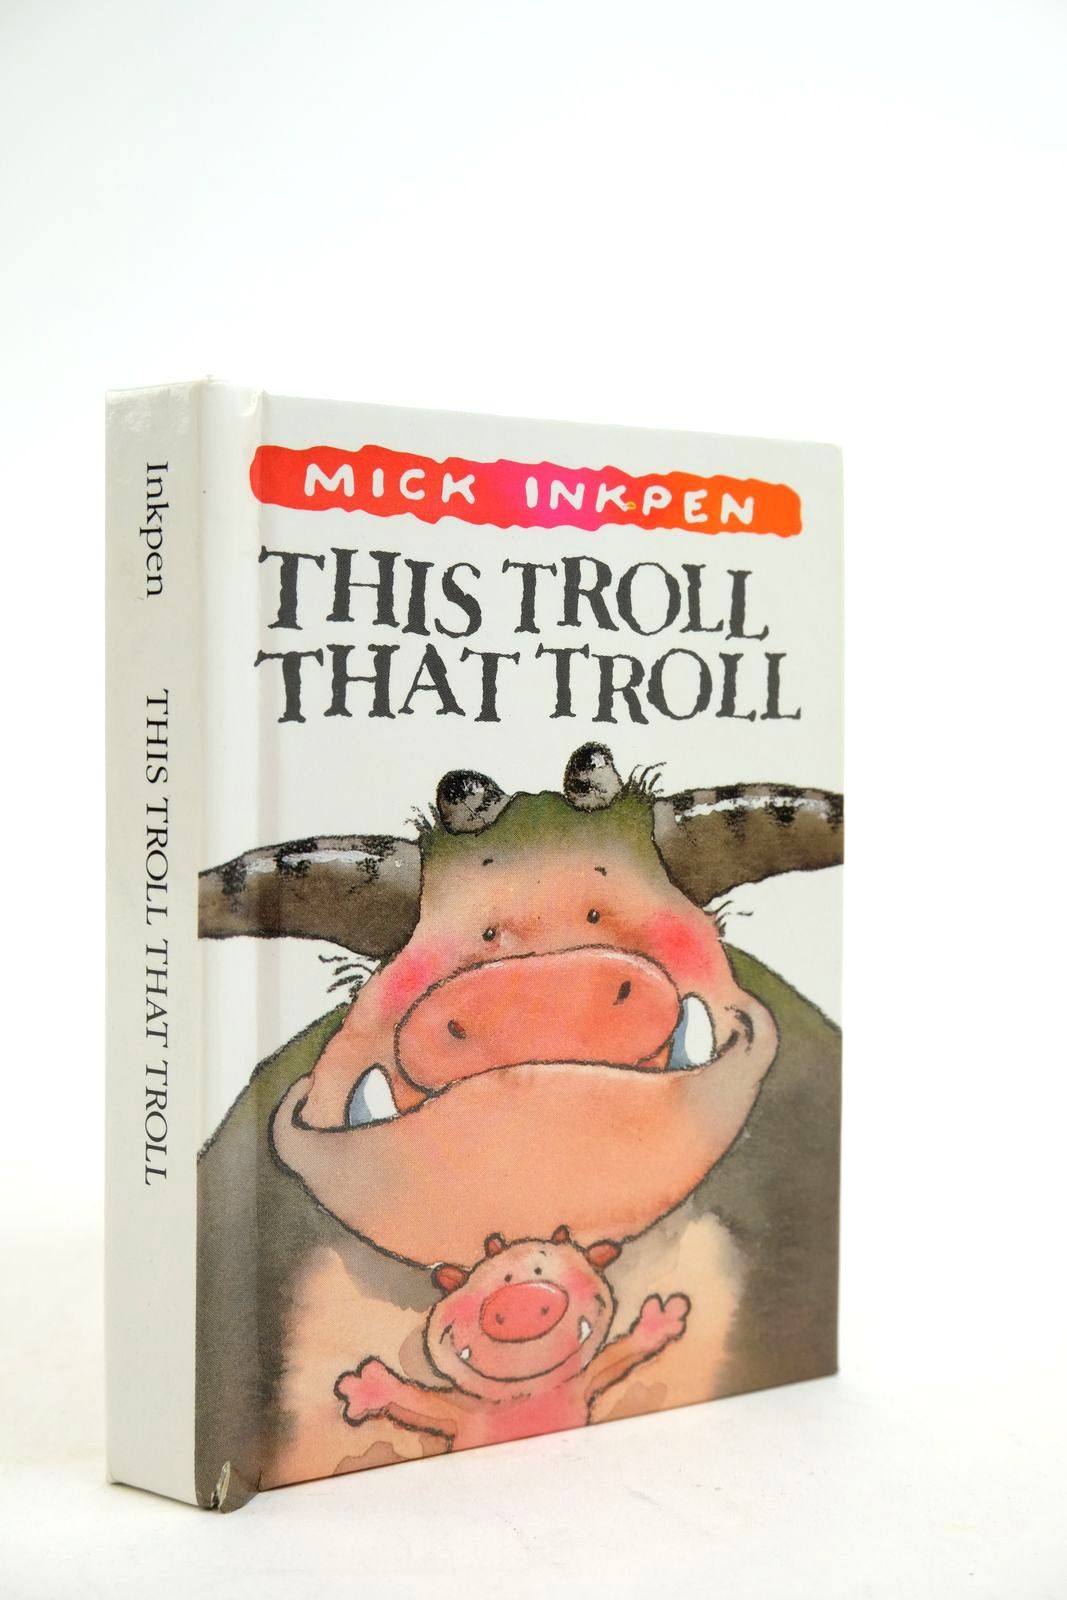 Photo of THIS TROLL THAT TROLL written by Inkpen, Mick illustrated by Inkpen, Mick published by BCA (STOCK CODE: 2140907)  for sale by Stella & Rose's Books